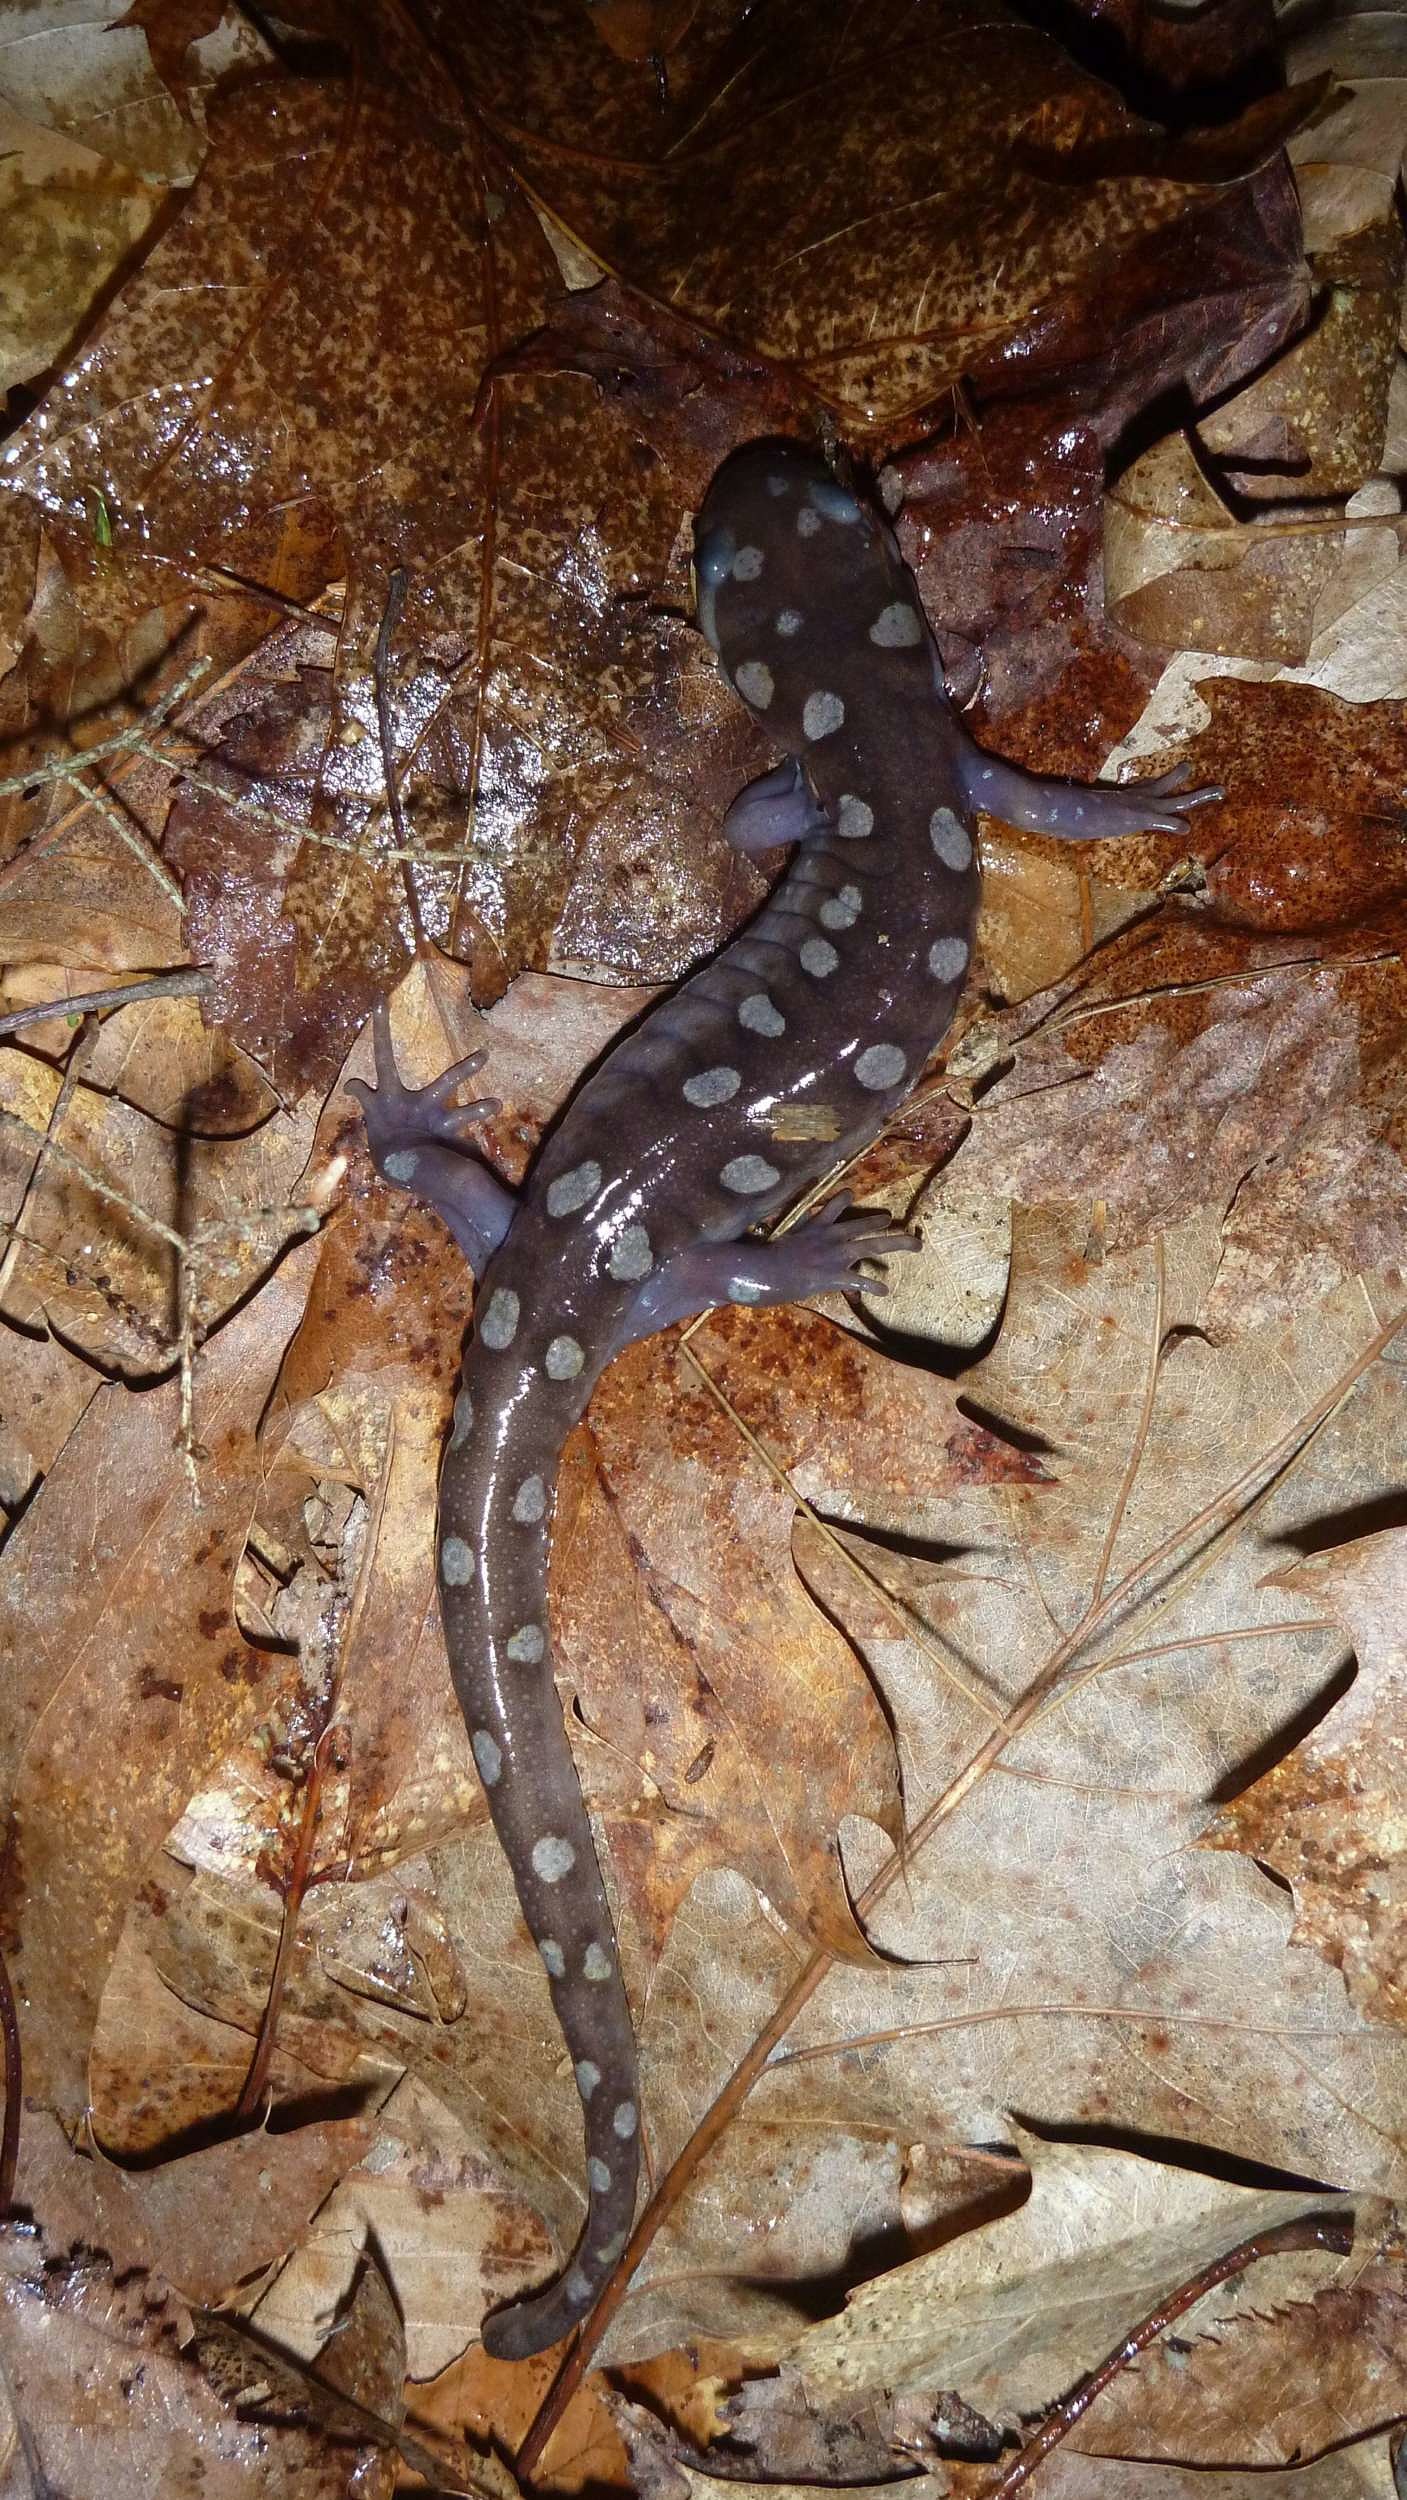 A (yellow) spotted salamander with unusually drab spots, found at an Antrim road crossing. (photo © Nathan Schaefer)